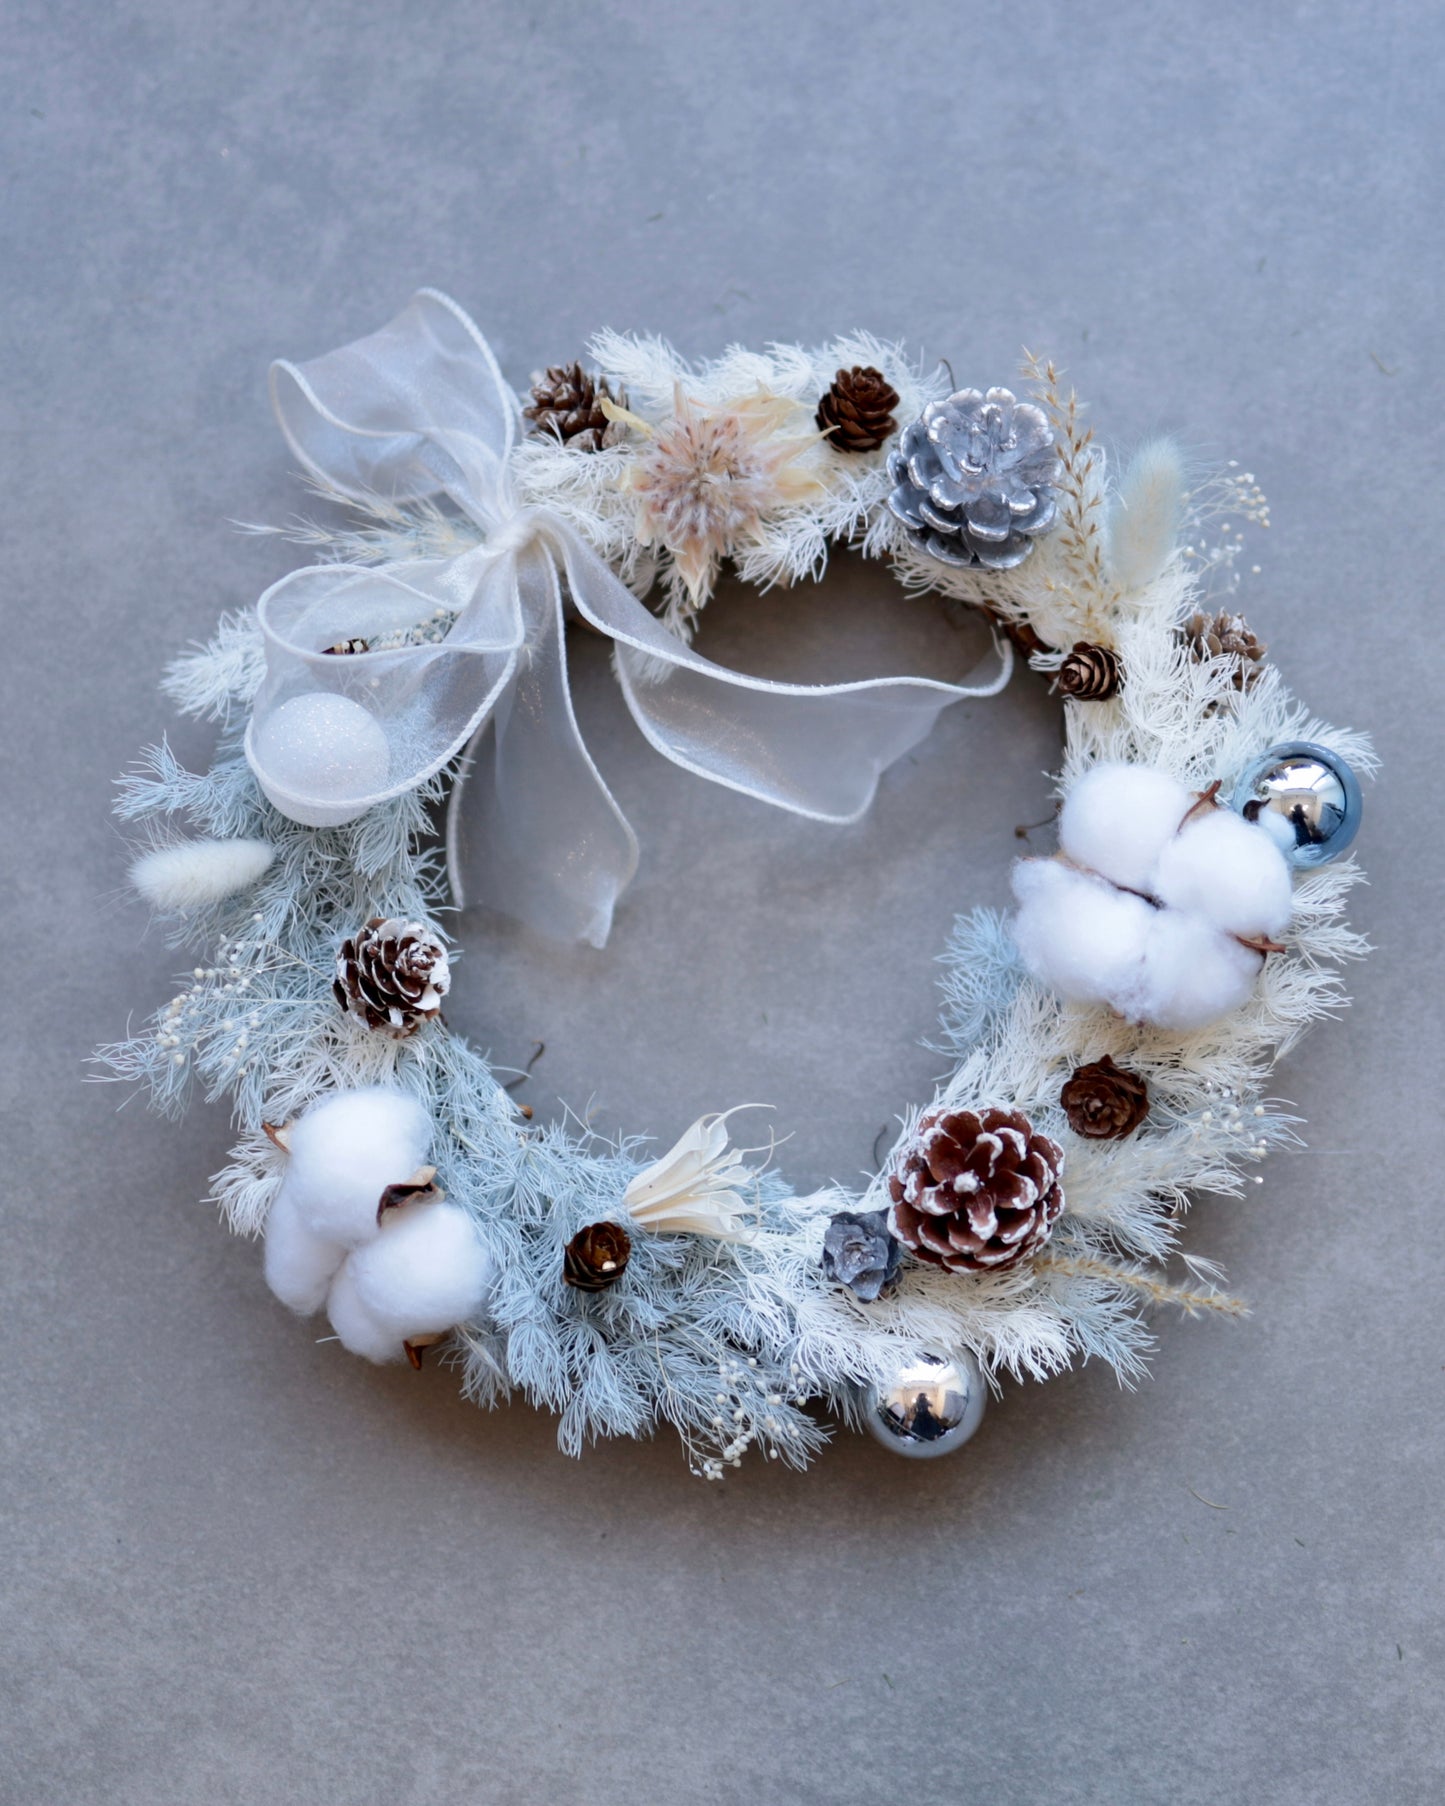 Rounded Shape Christmas Wreath Workshop with Preserved and Dried Flowers